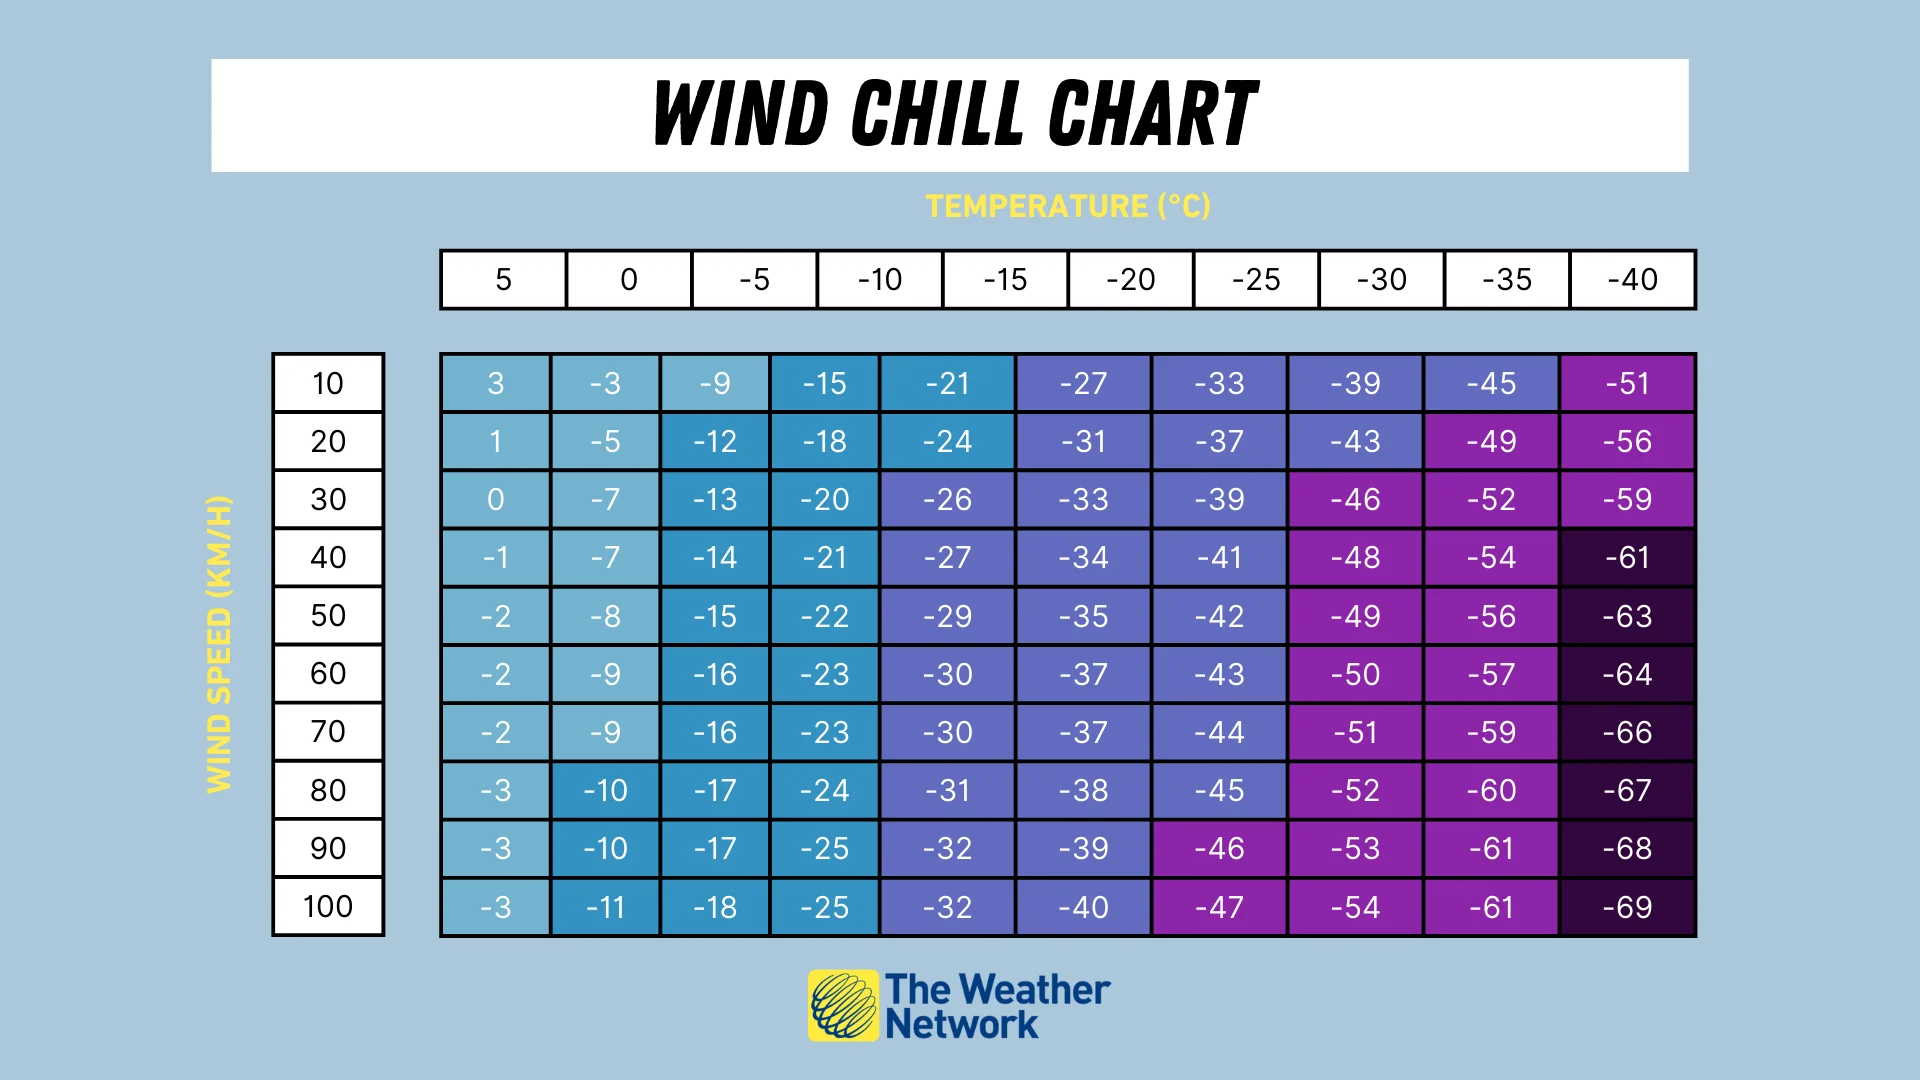 Explainer: Wind chill chart, how to measure wind chill